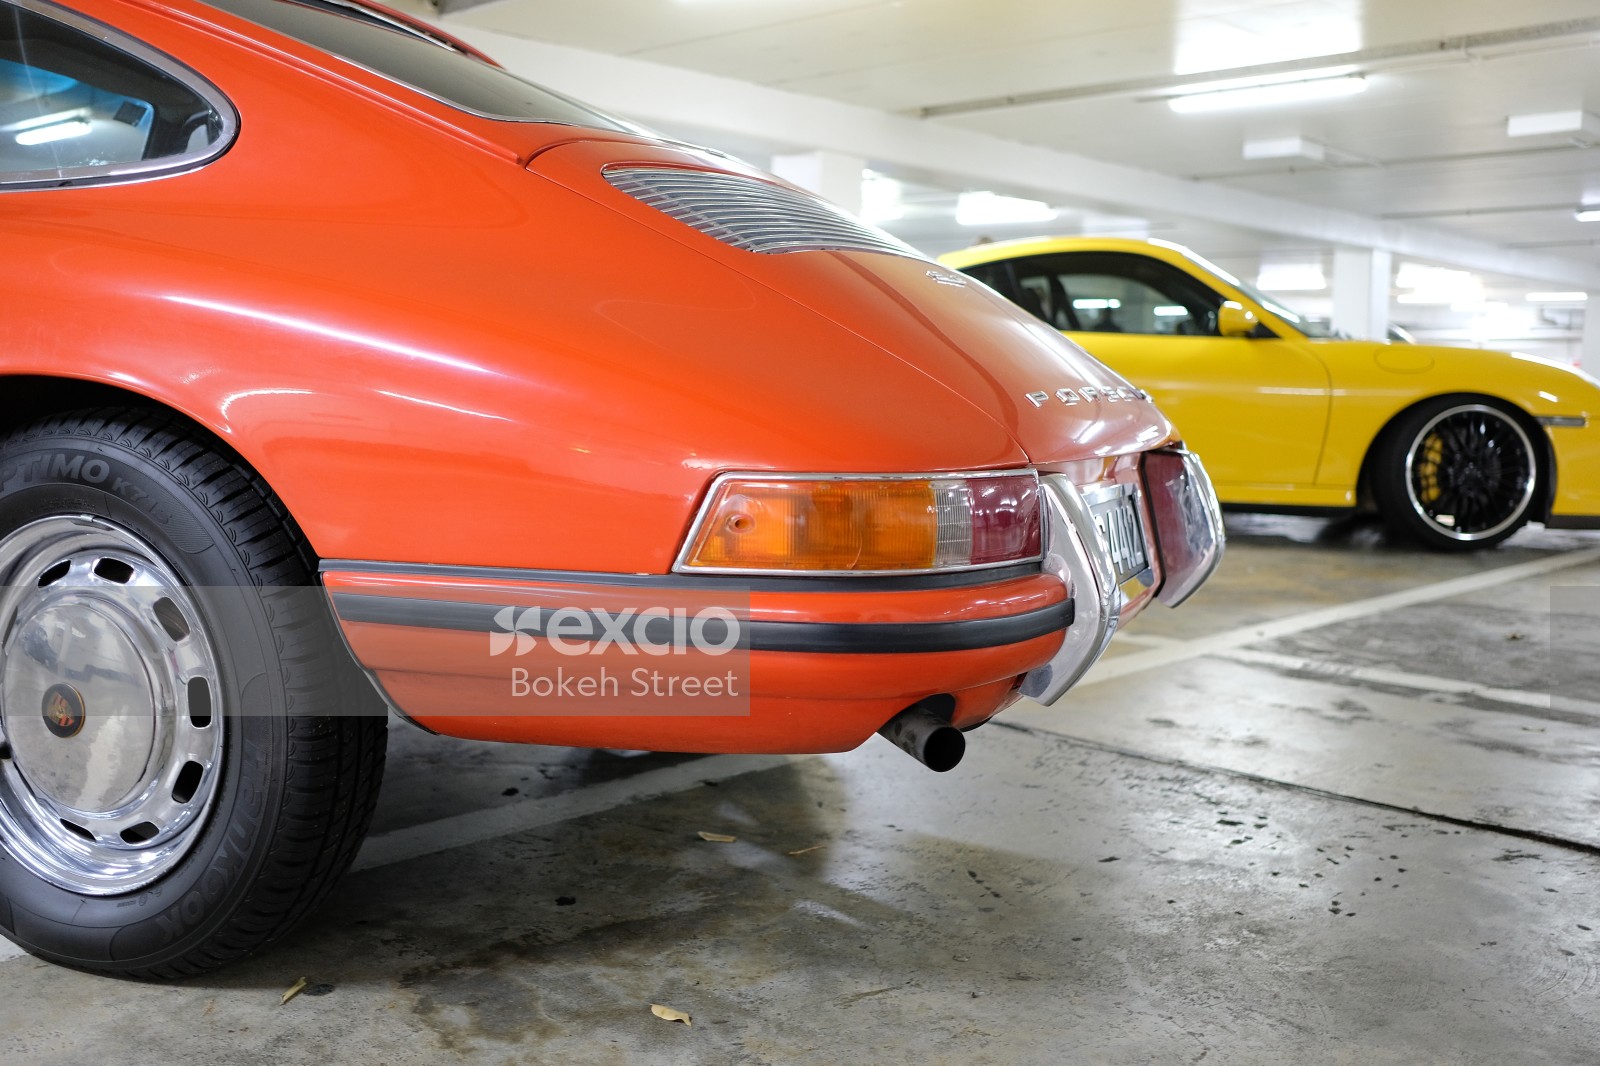 Classic orange Porsche 912 tail light and exhaust pipe